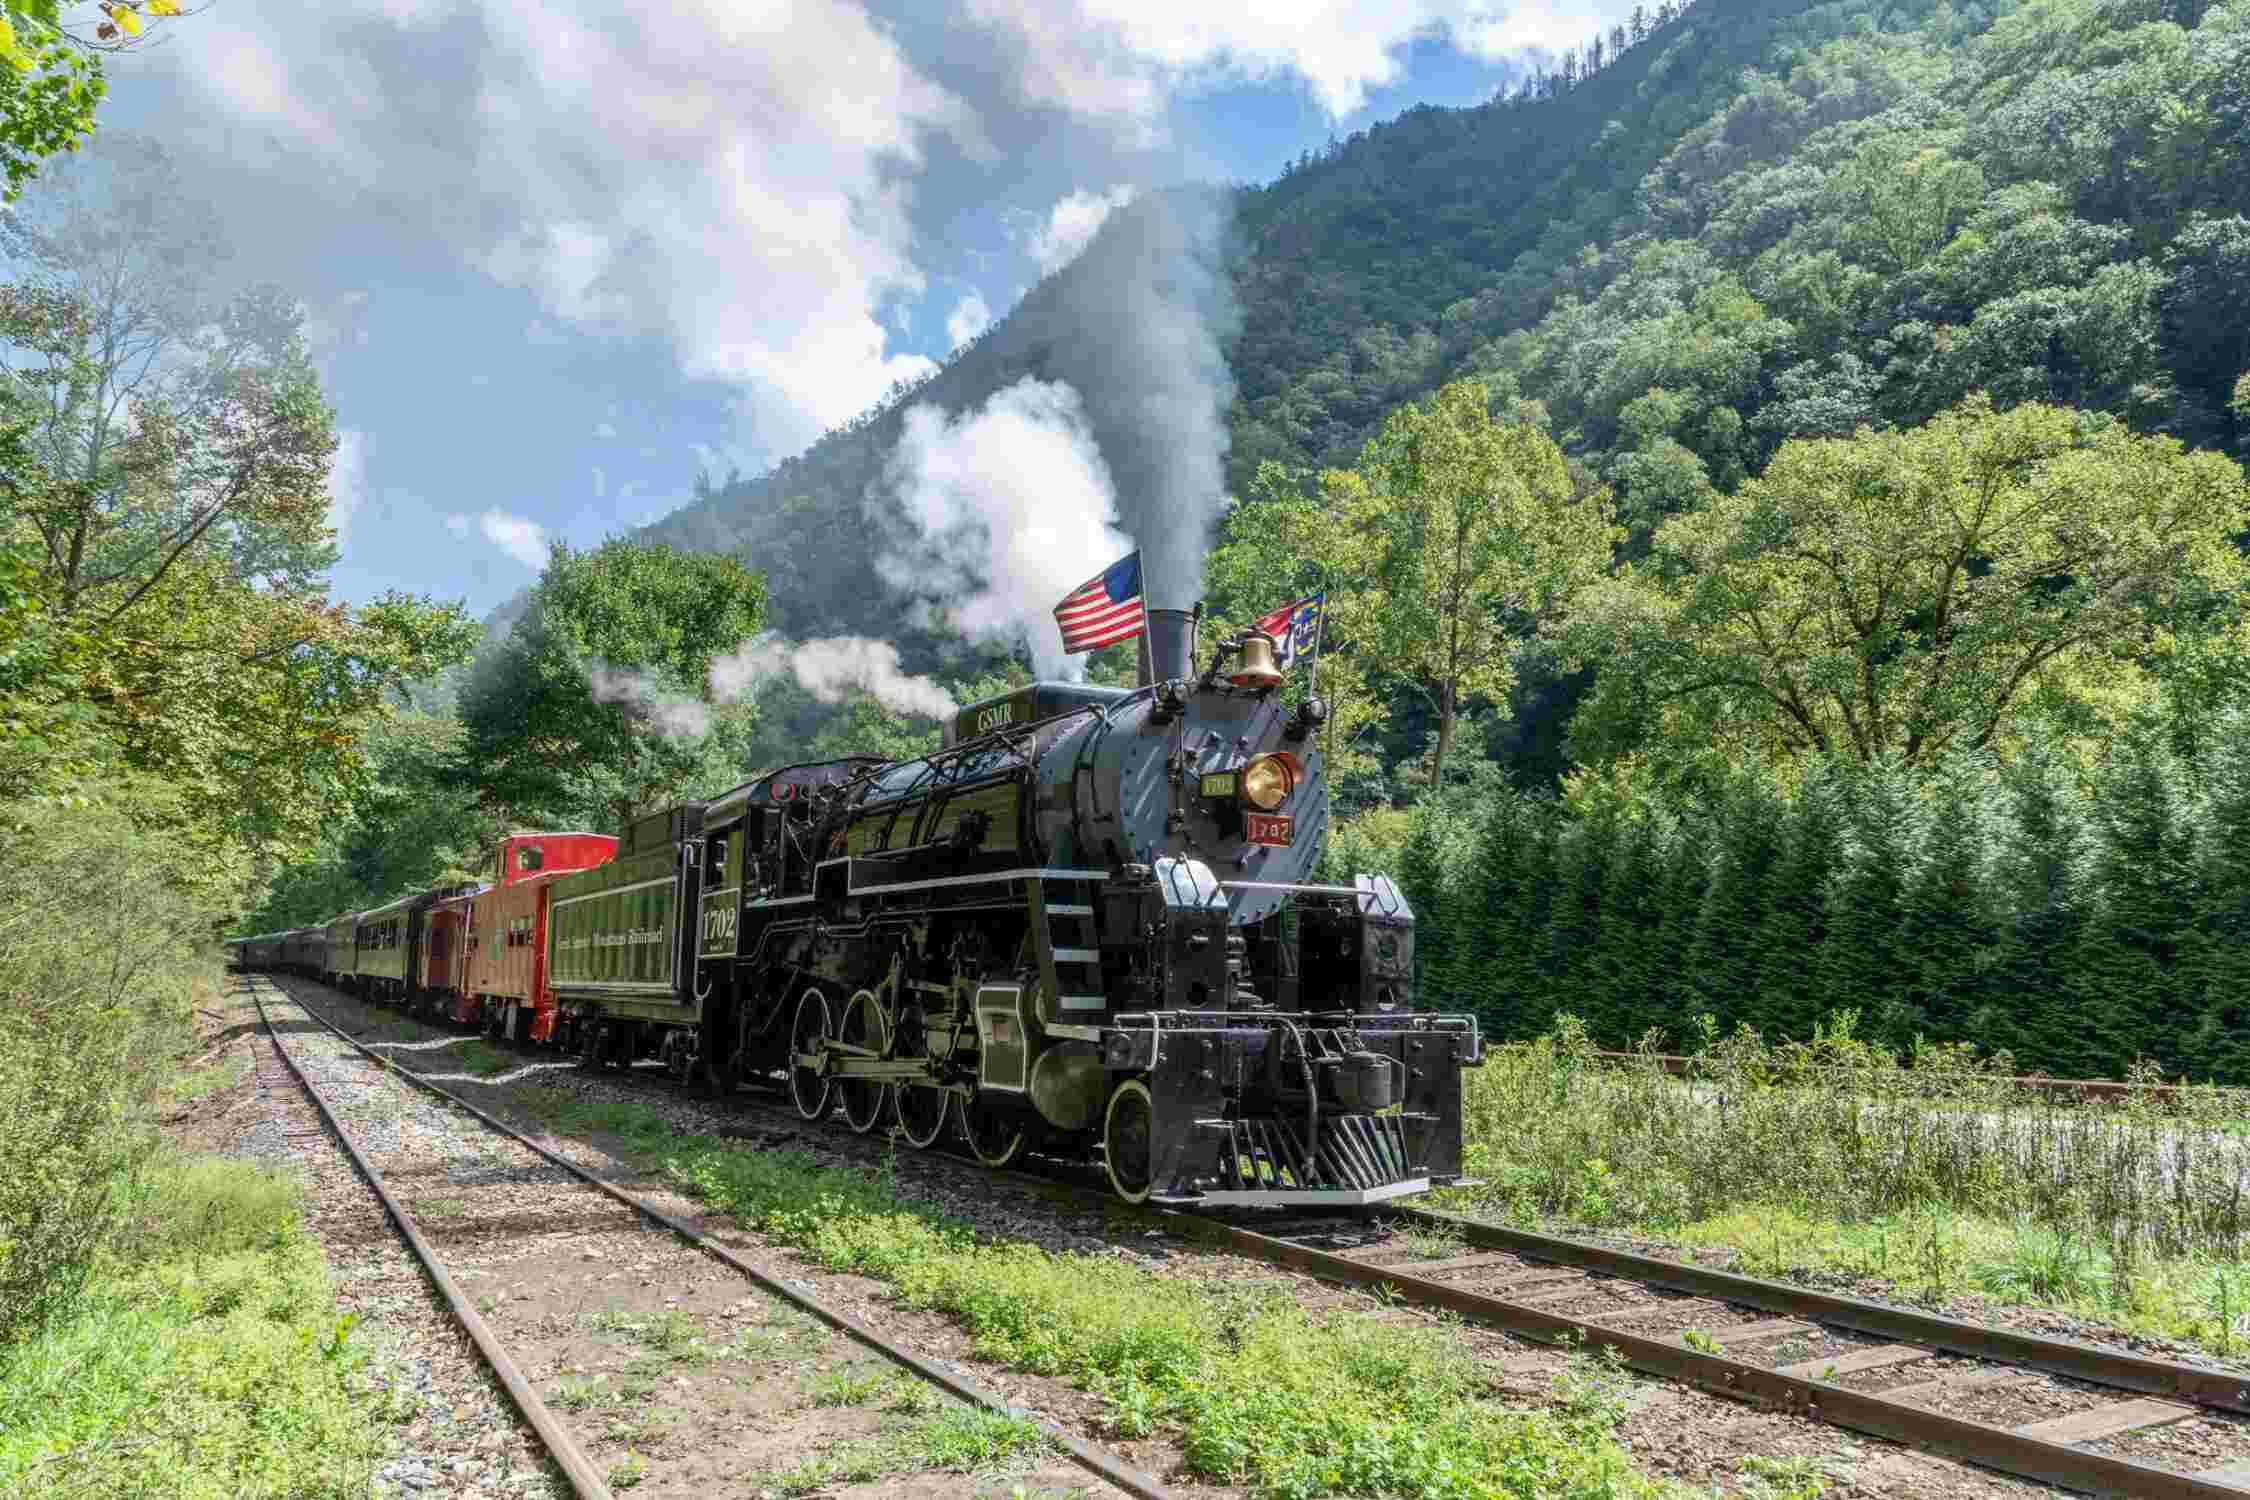 The Great Smoky Mountains Railroad